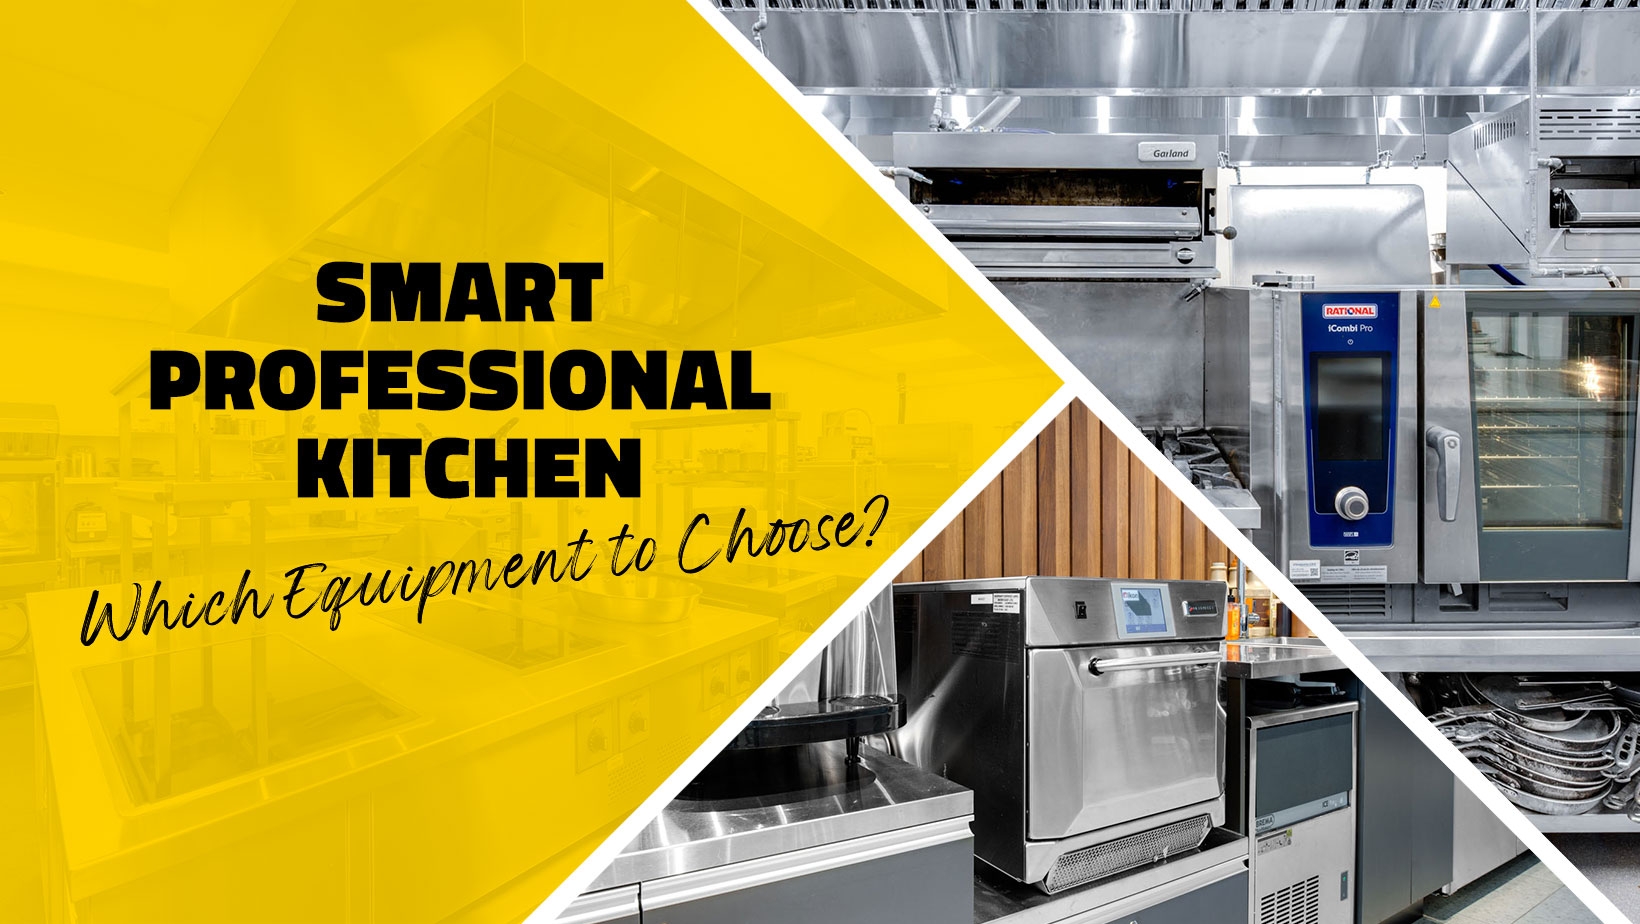 Smart Professional Kitchen: Which Equipment to Choose?